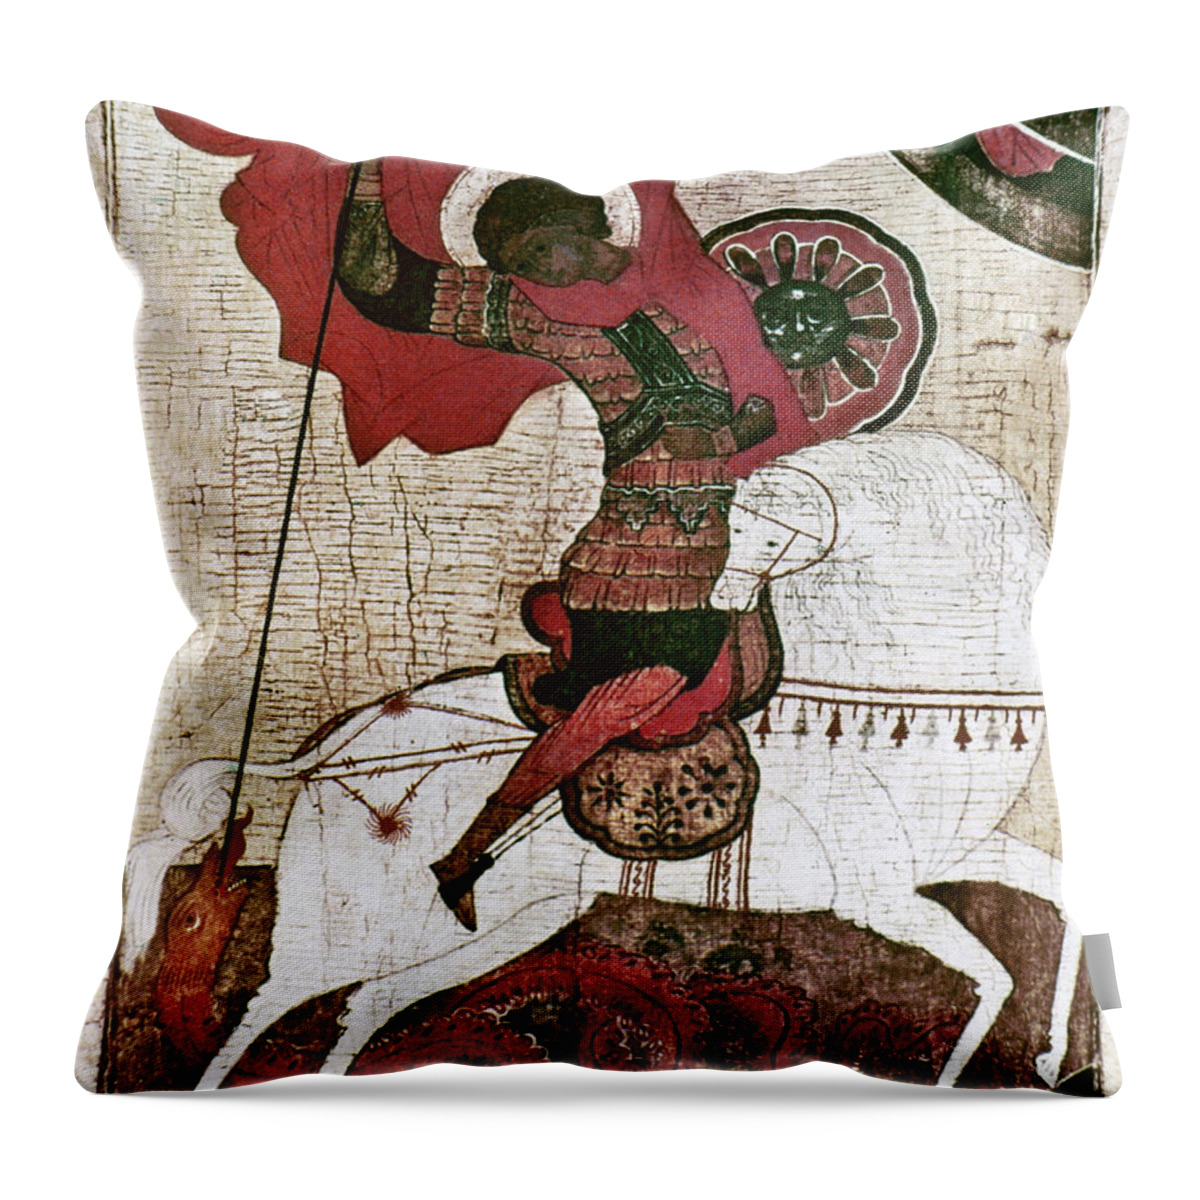 15th Century Throw Pillow featuring the photograph Saint George by Granger